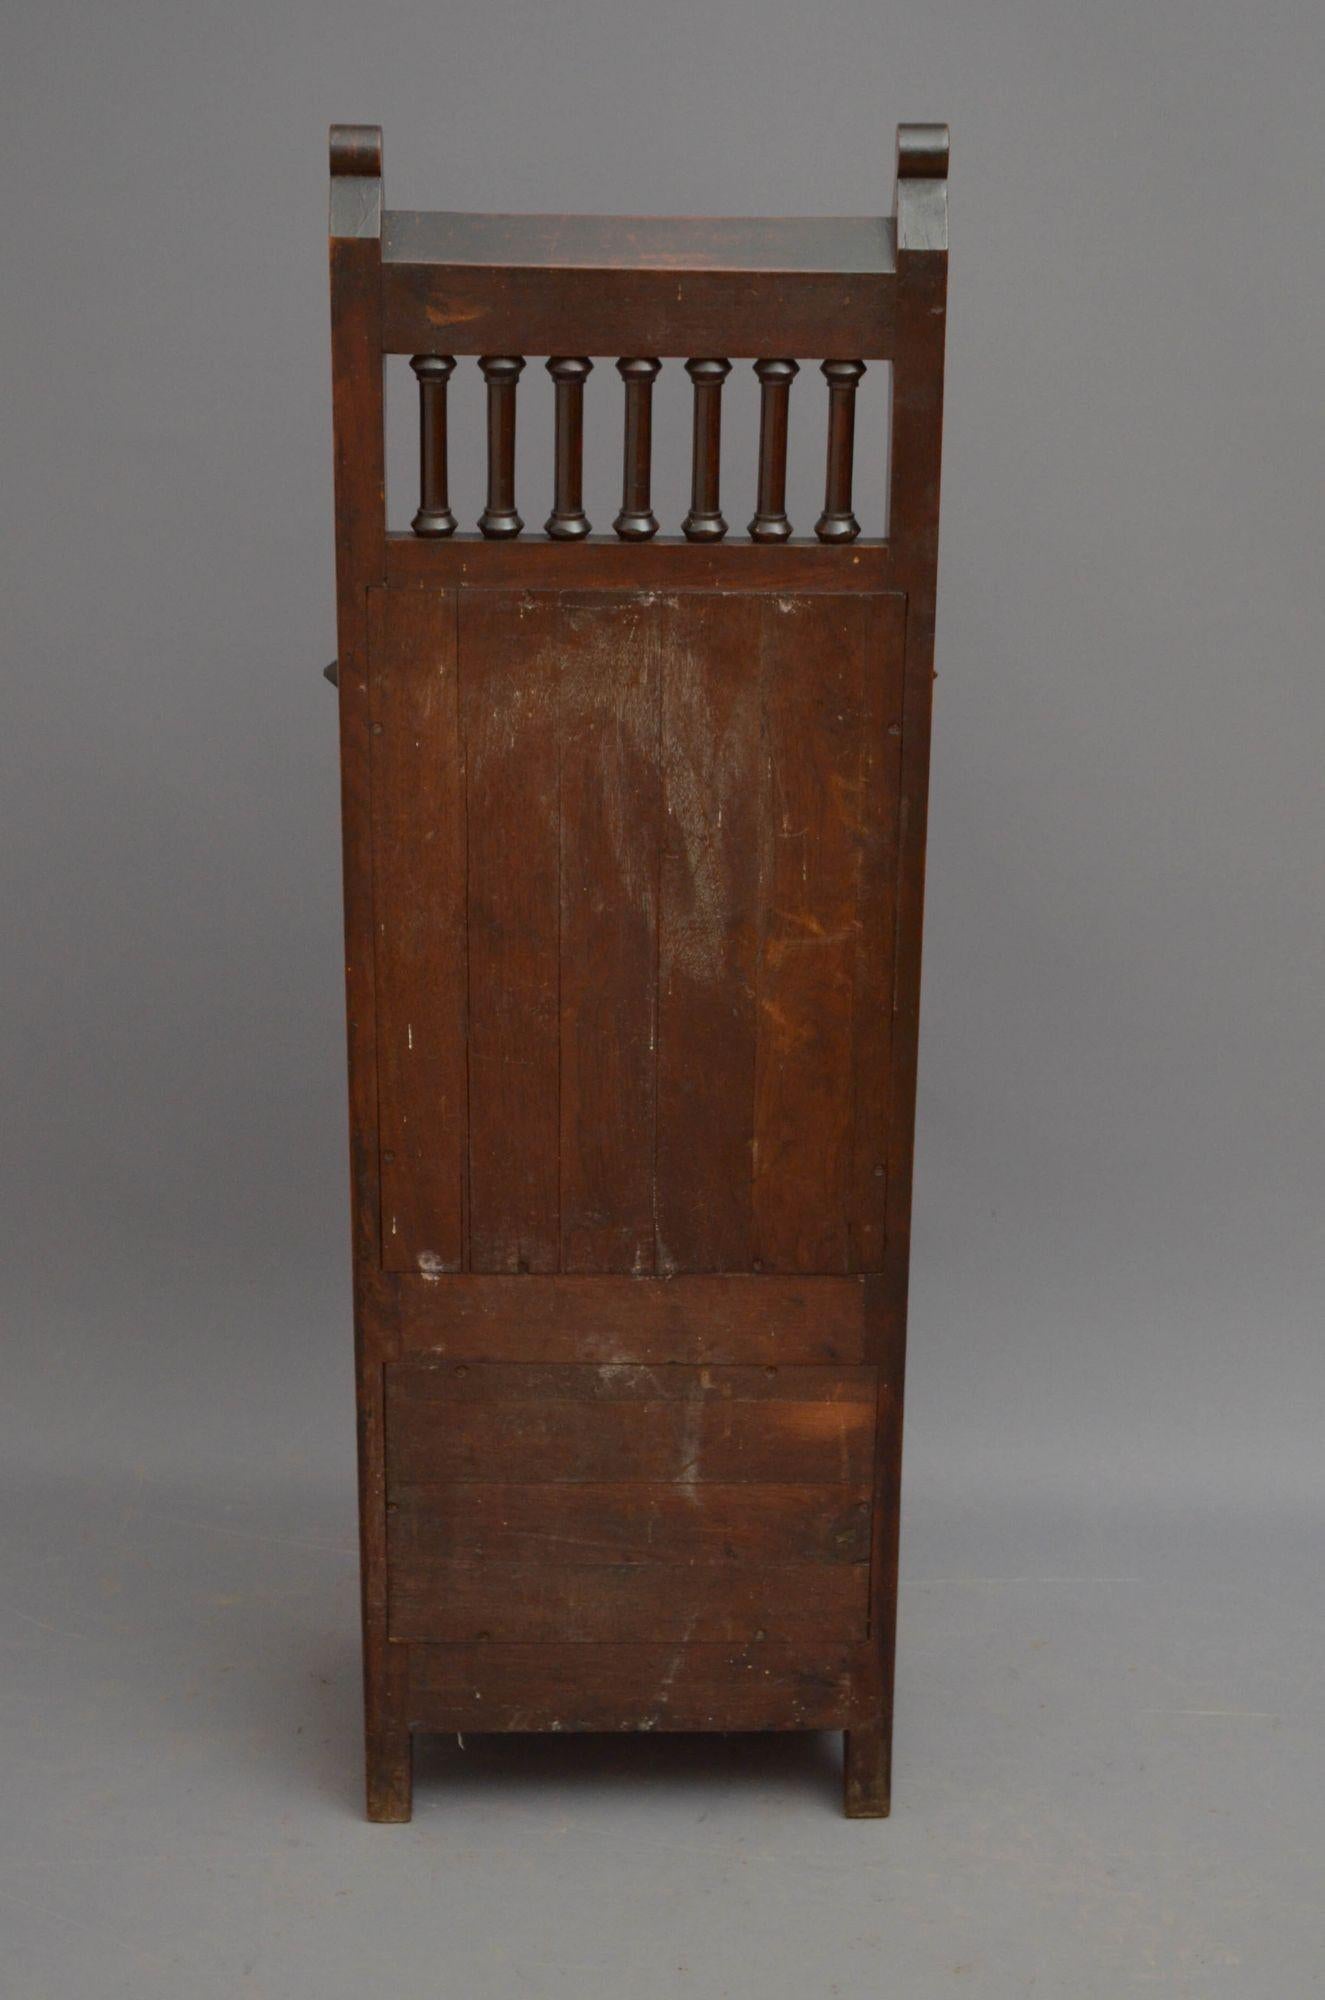 Gothic Revival Umbrella Stand in Mahogany For Sale 7